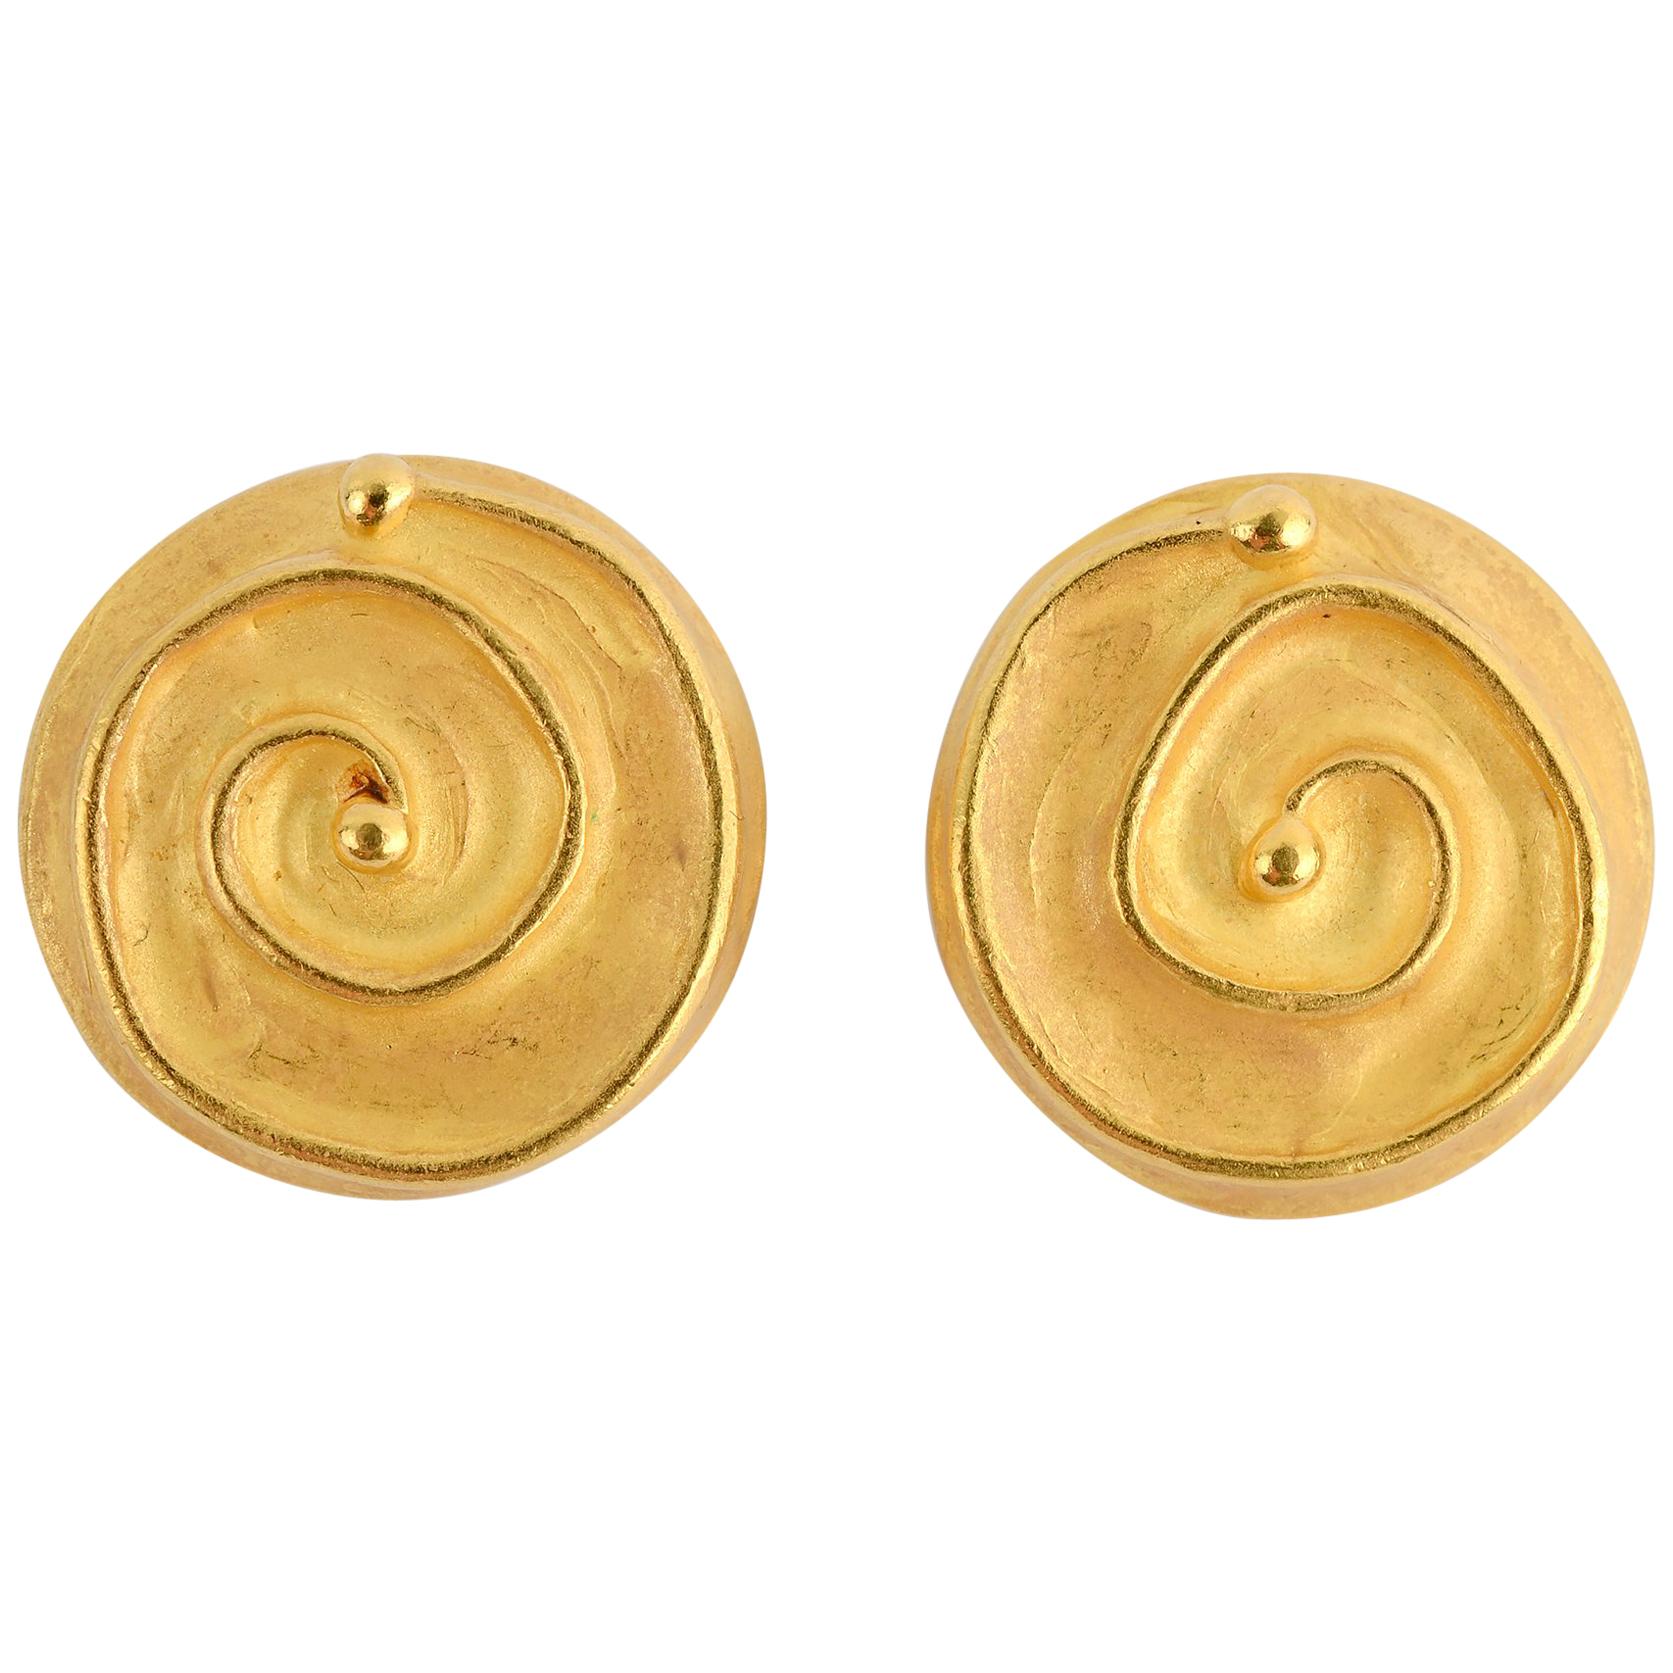 Denise Roberge Gold Button Earrings with Coiled Design